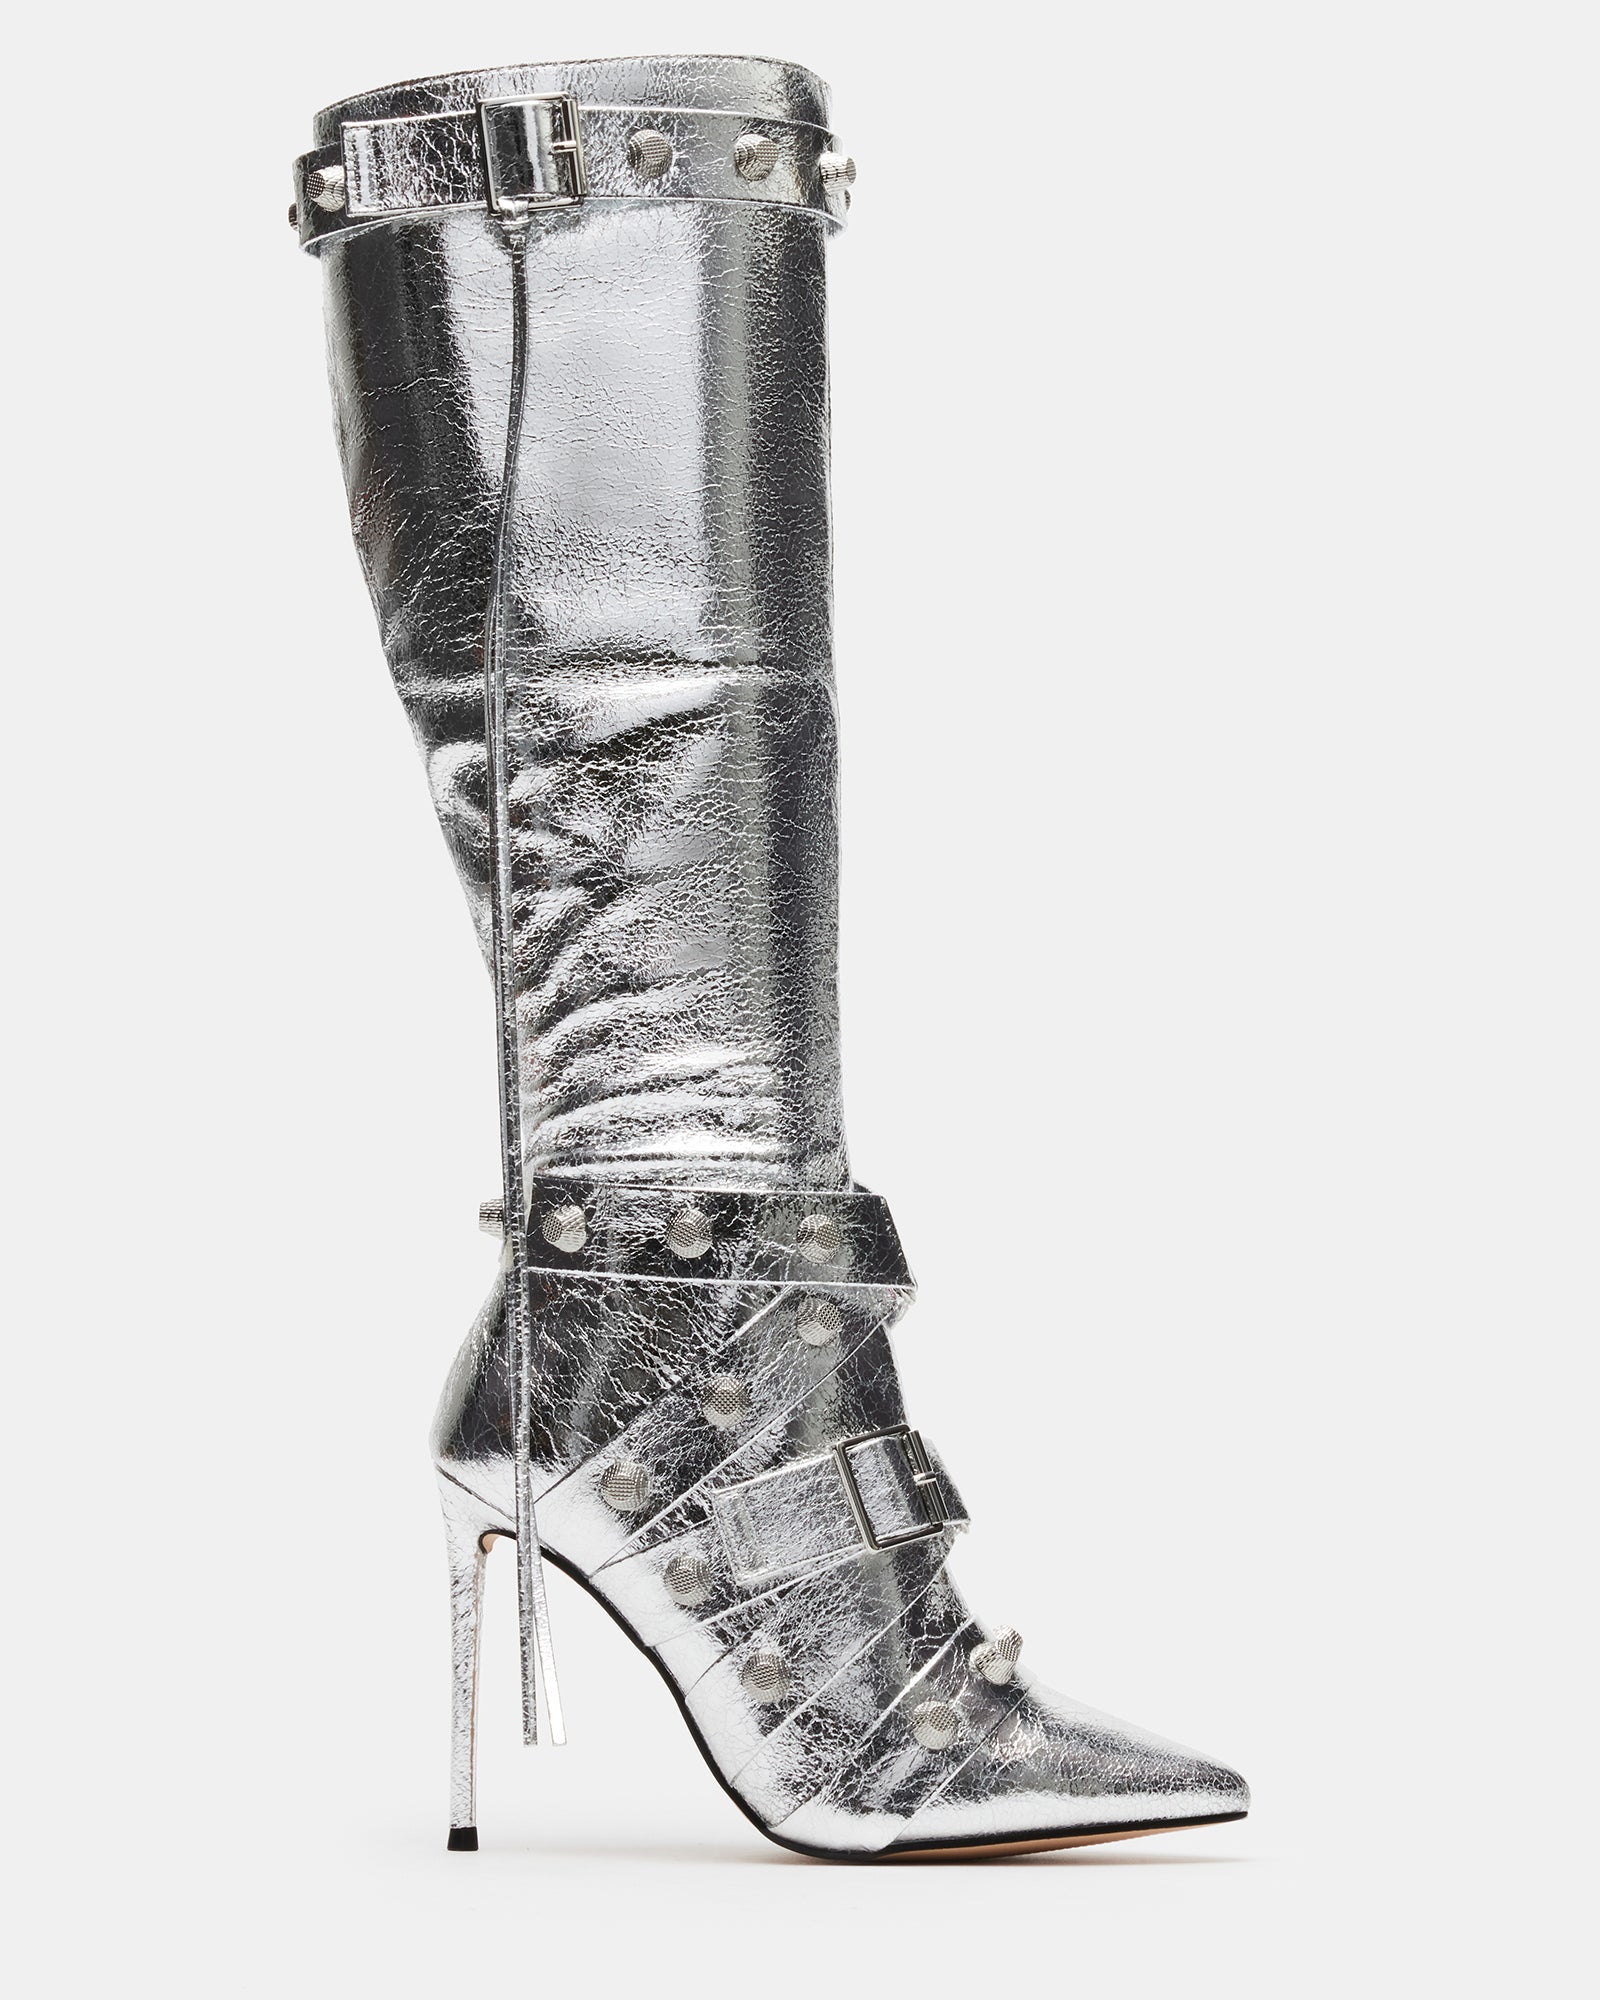 Fall Fashion 2013: Stacked-Heel Boots - Bloomberg